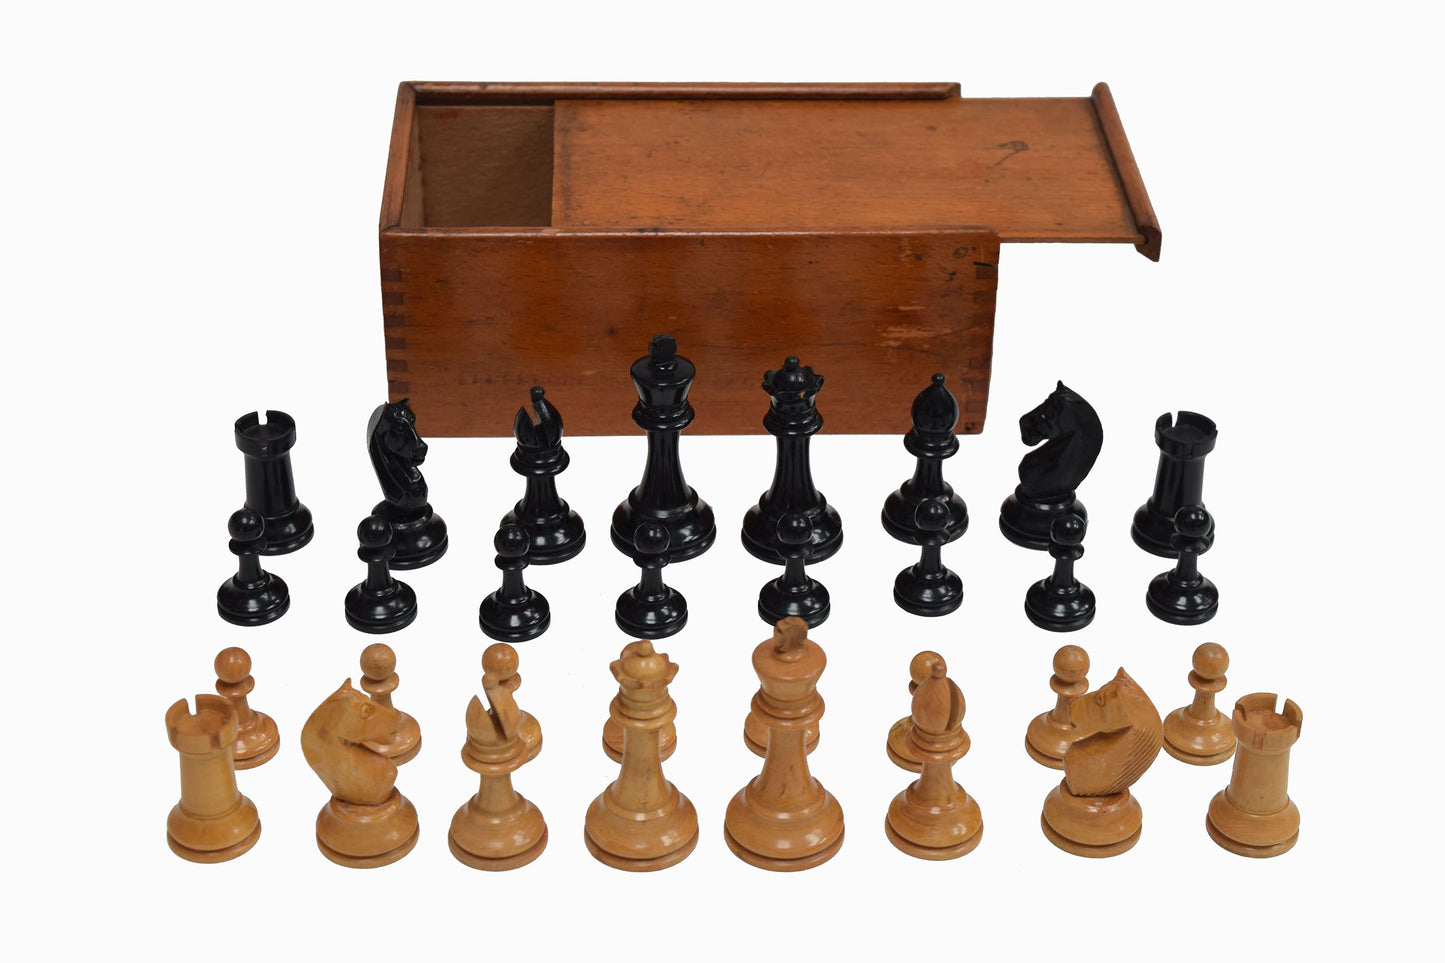 Vintage wooden chess set in box